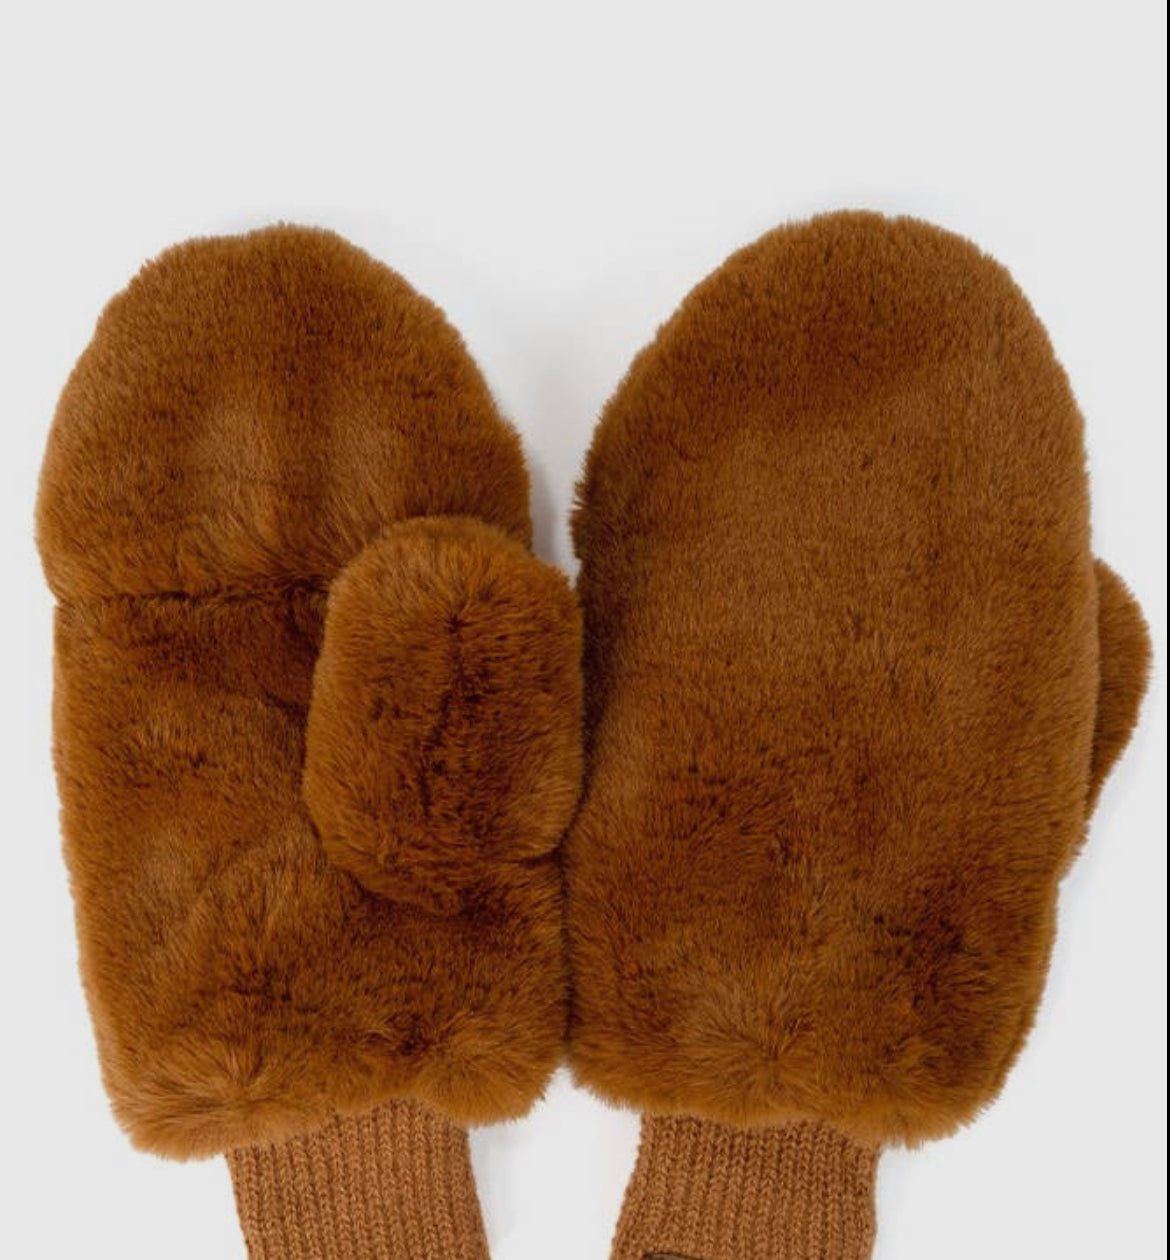 Faux Fur Mittens with Shepherd..
~